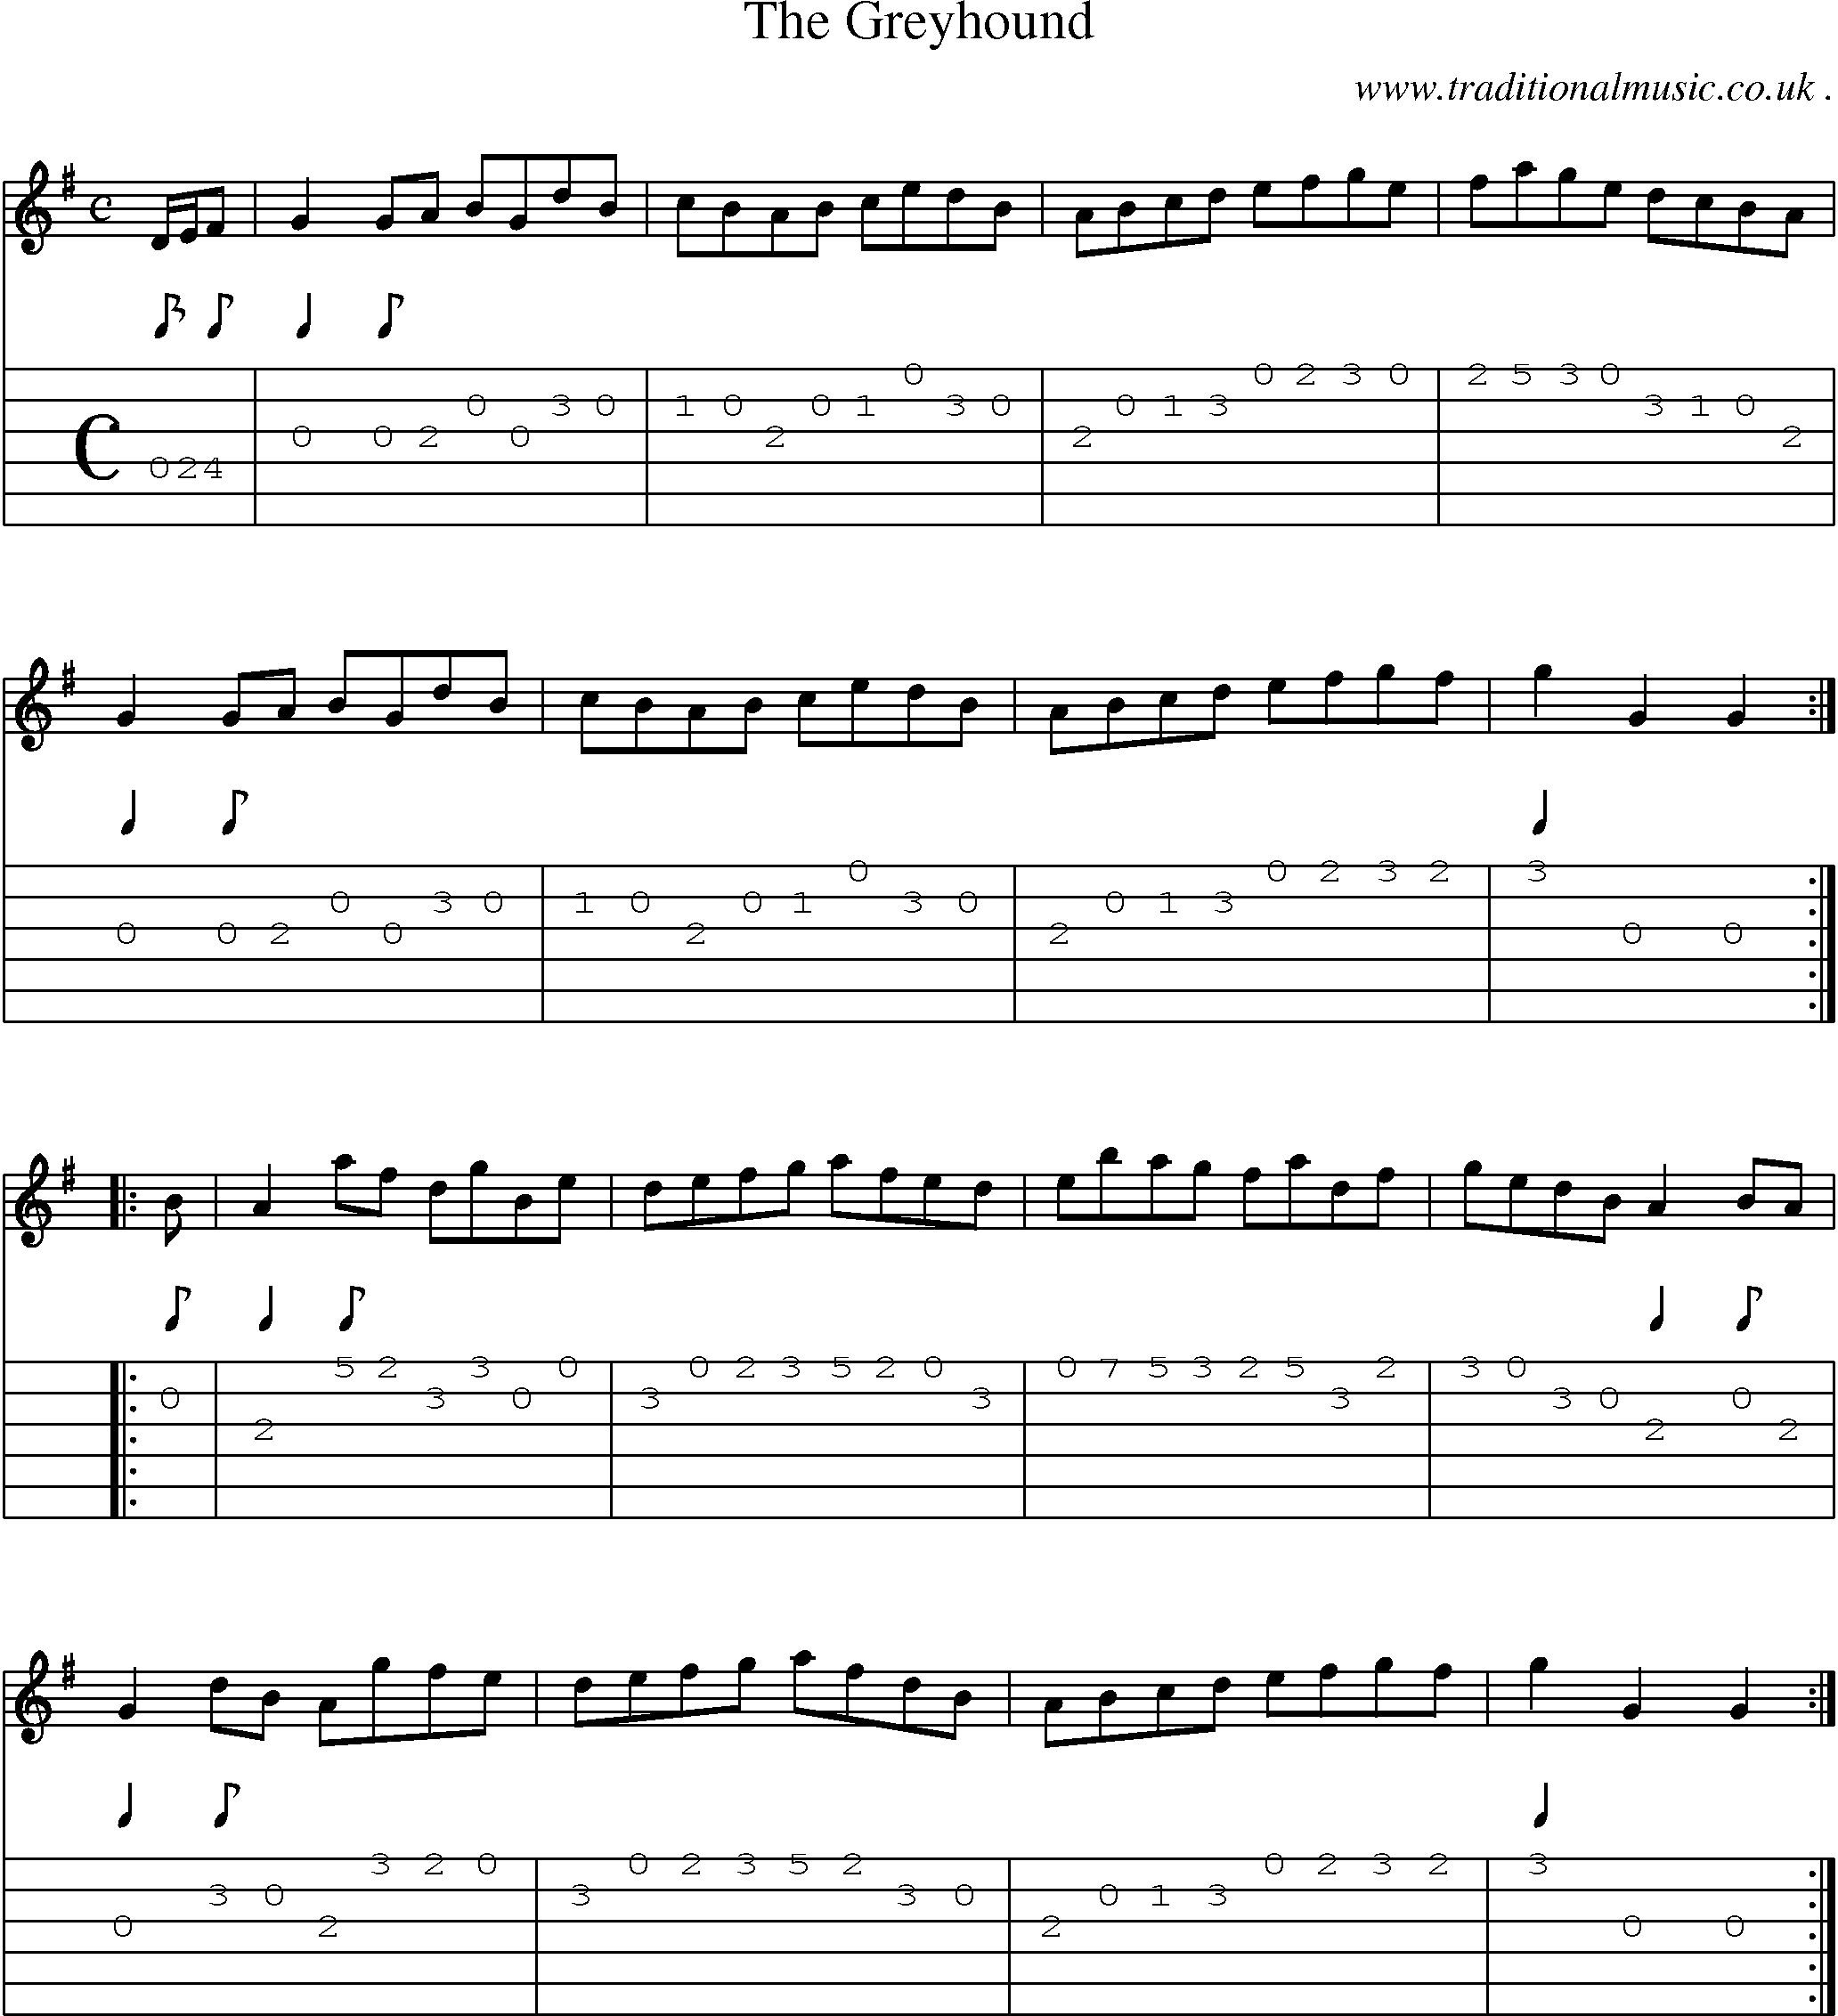 Sheet-Music and Guitar Tabs for The Greyhound